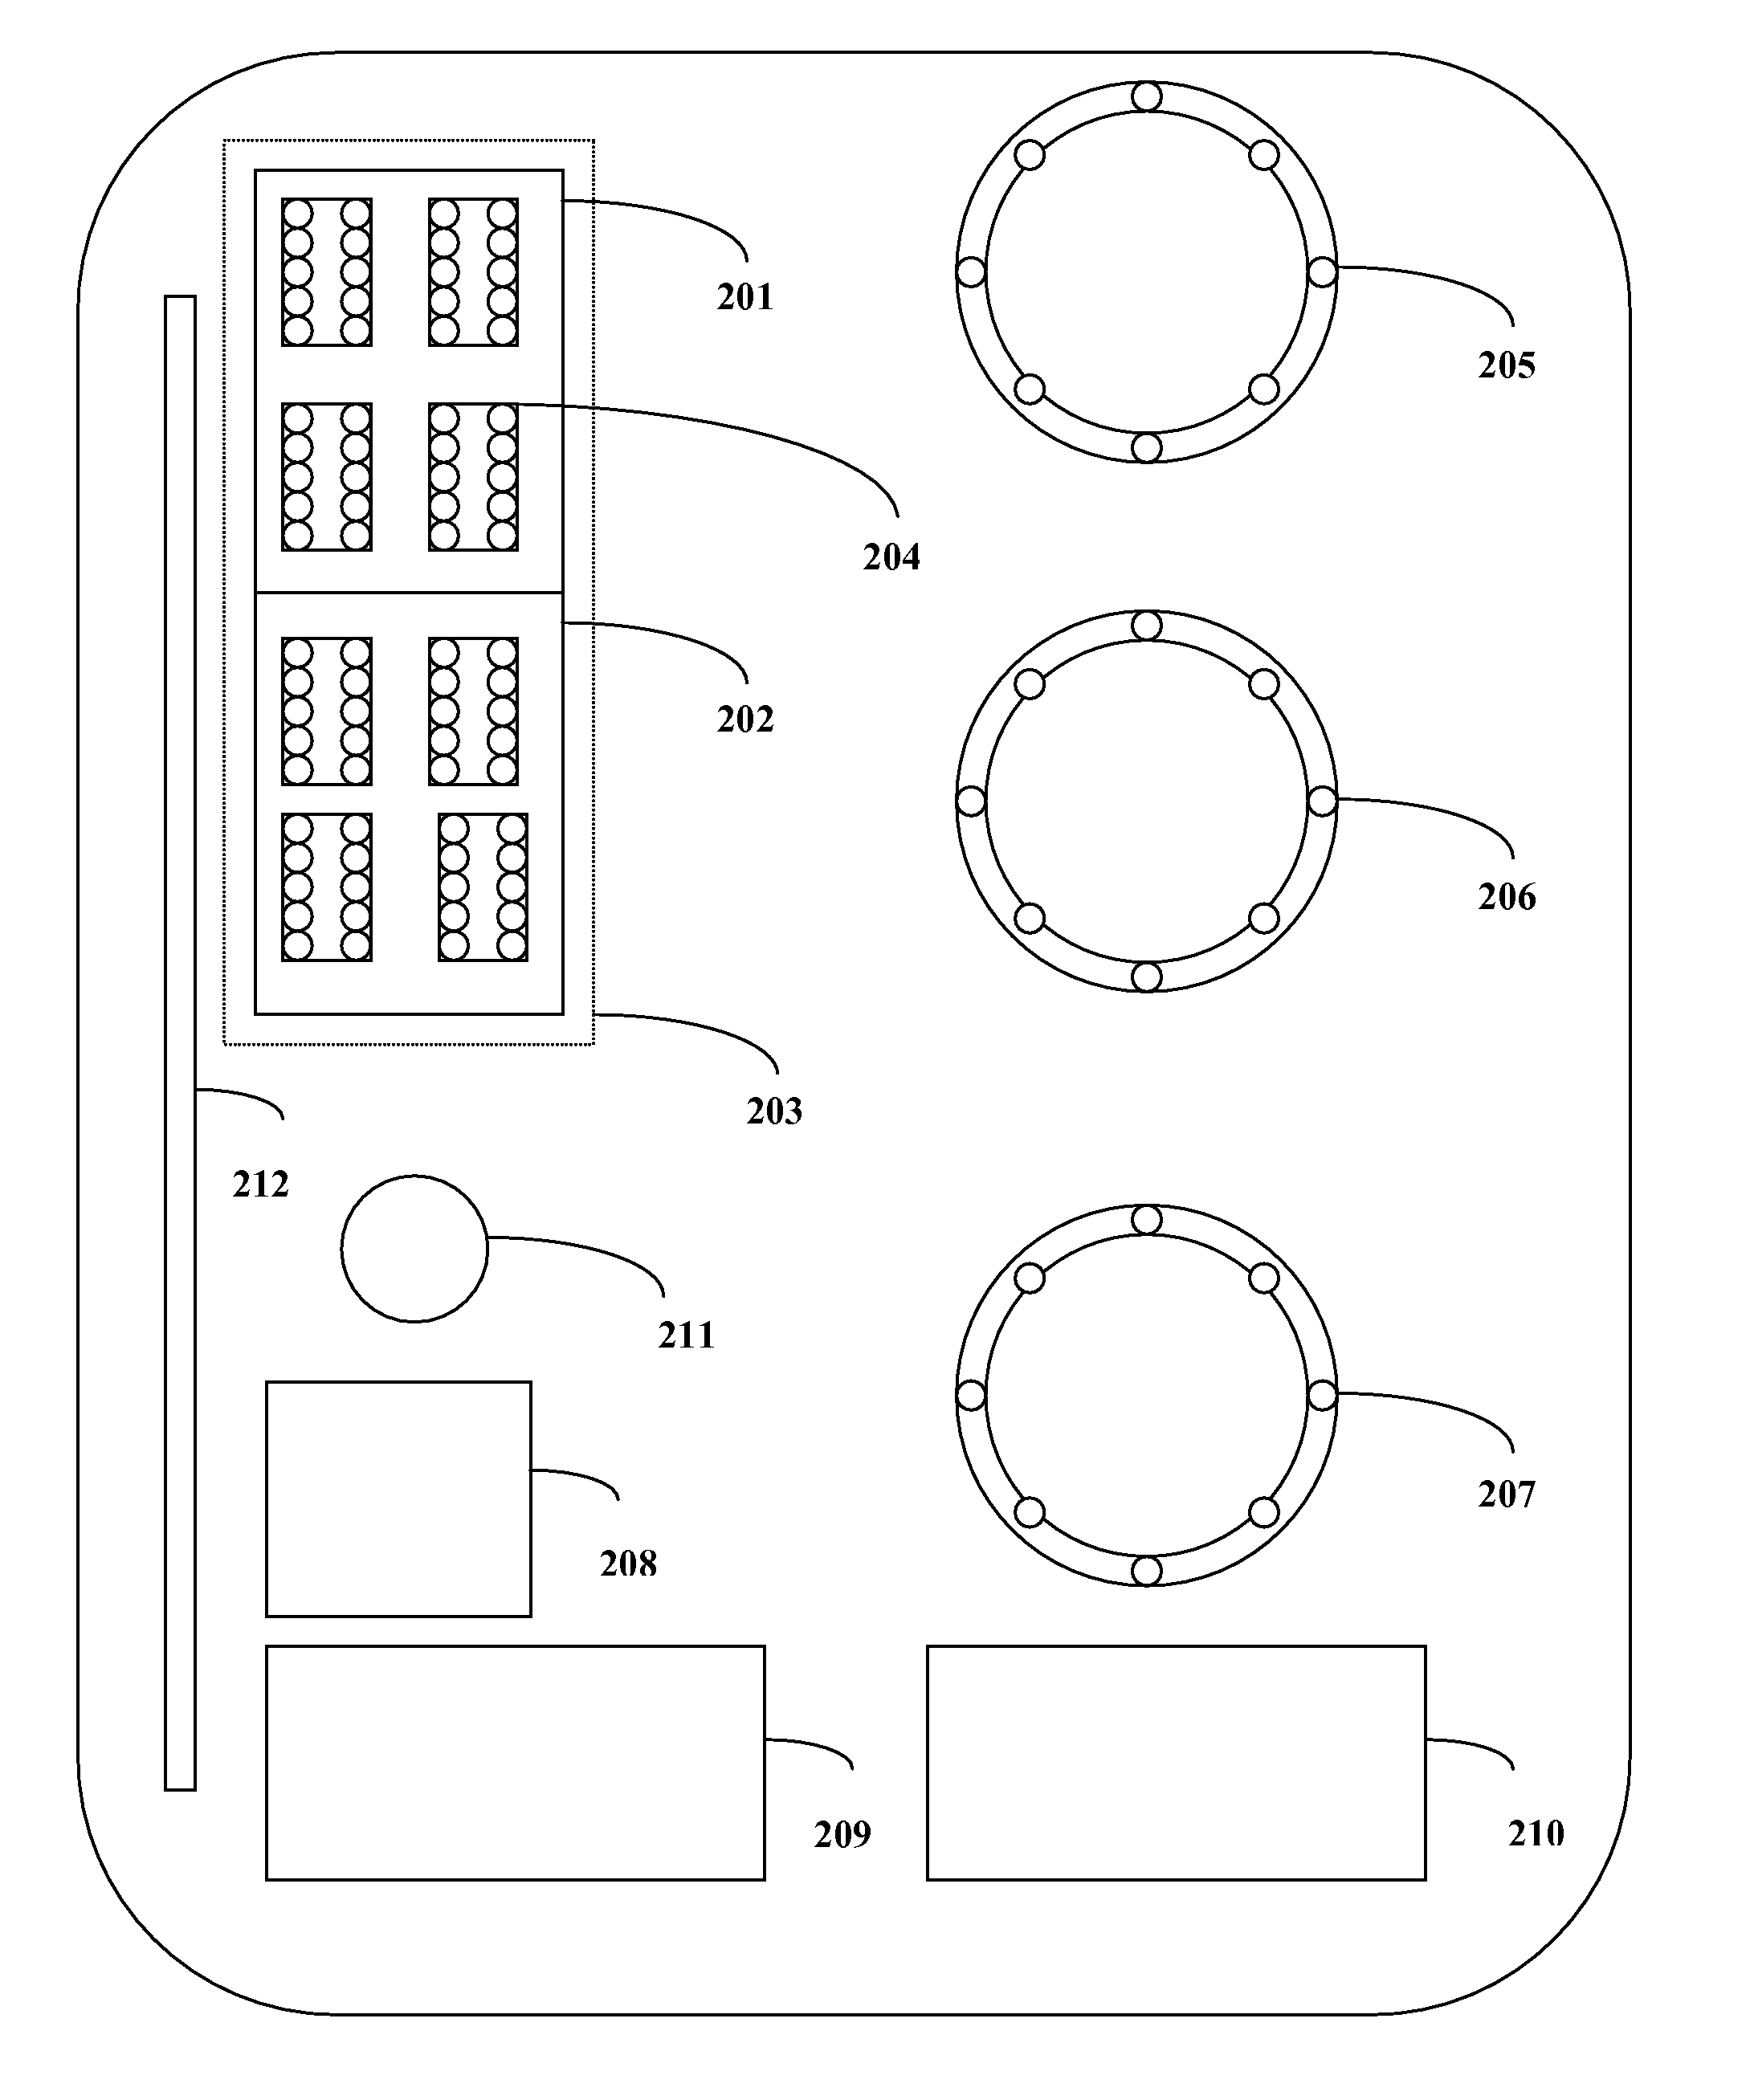 Method for scheduling samples in a combinational clinical analyzer